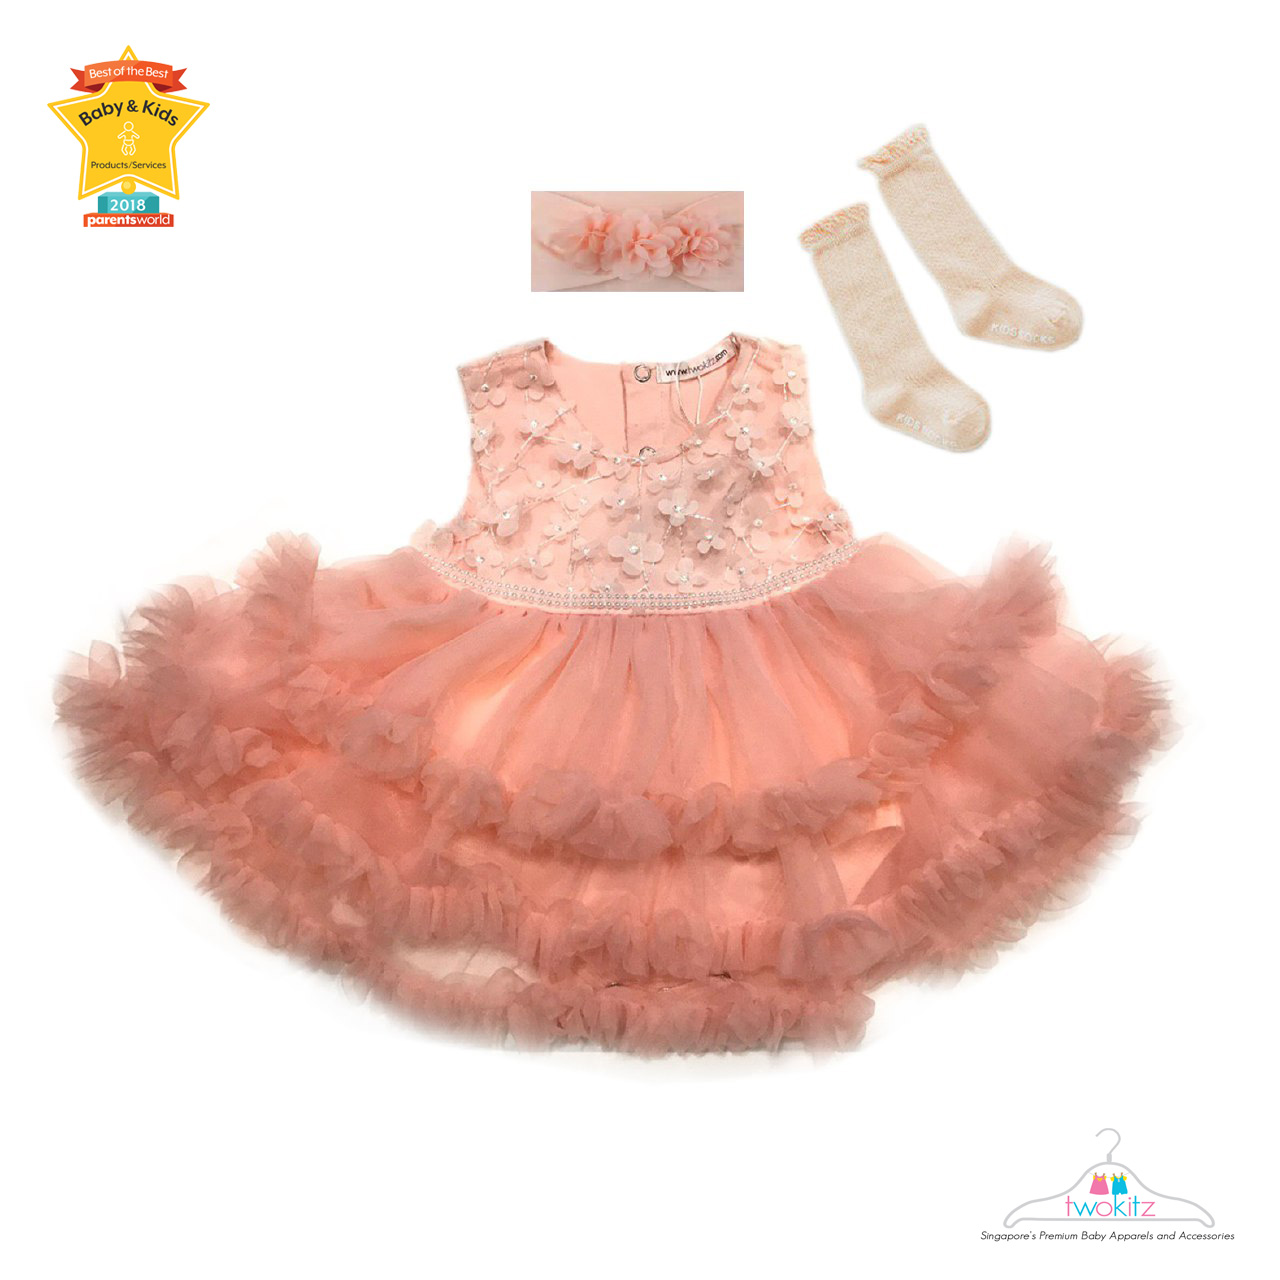 baby-fair Twokitz Coral Floral Pearl Fluffy Romper Dress + Free Headband and a pair of socks